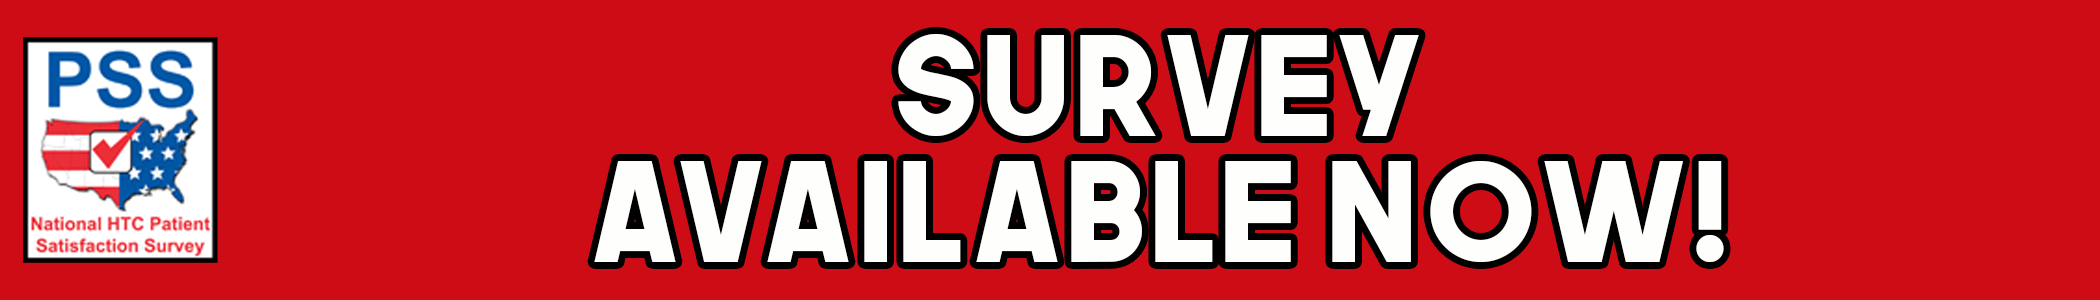 SurveyAvailableNow_red2024.png